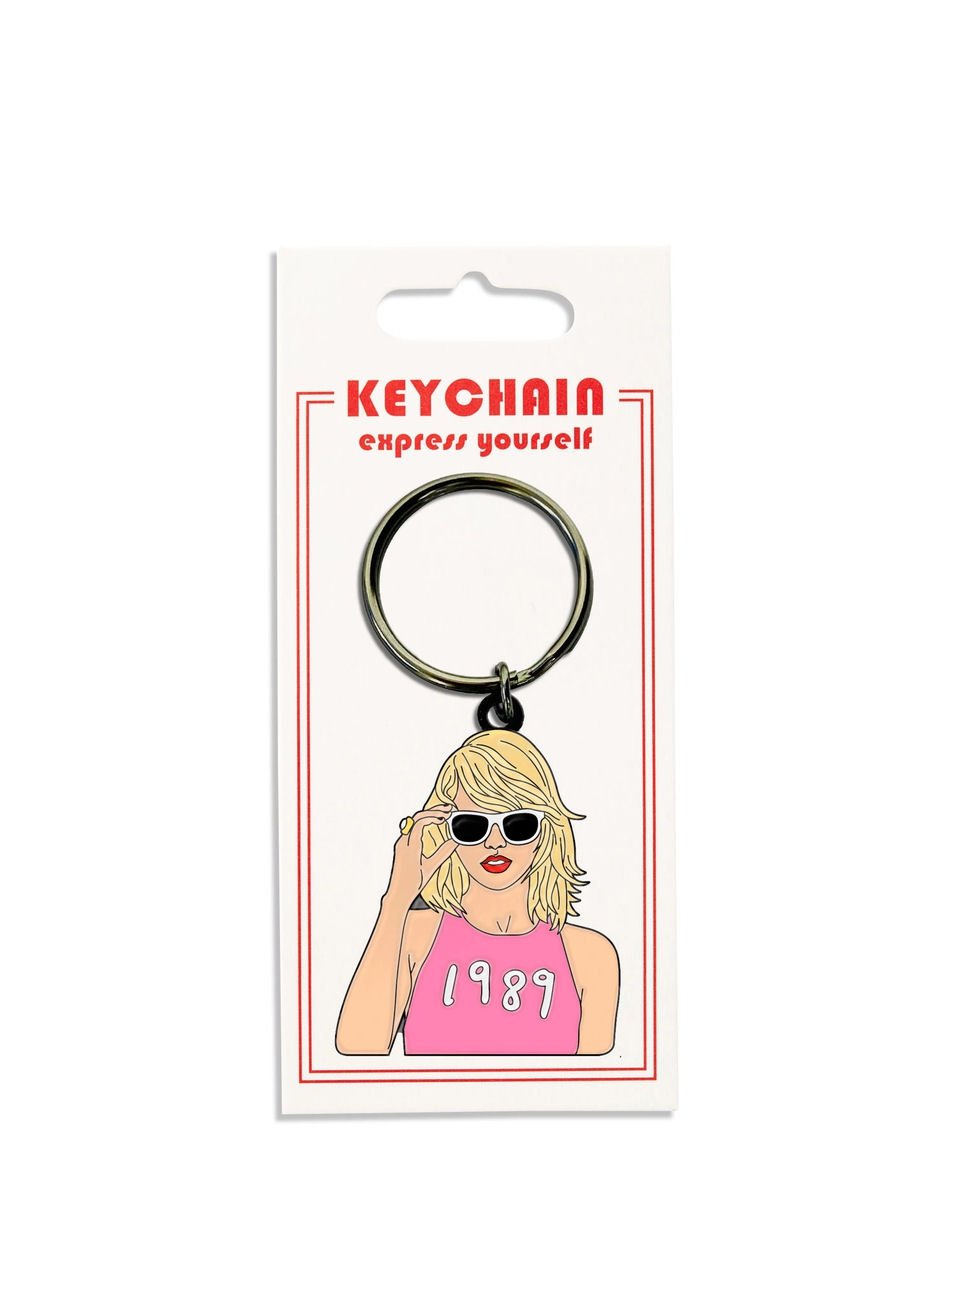 Taylor Swift Keychain — Lost Objects, Found Treasures